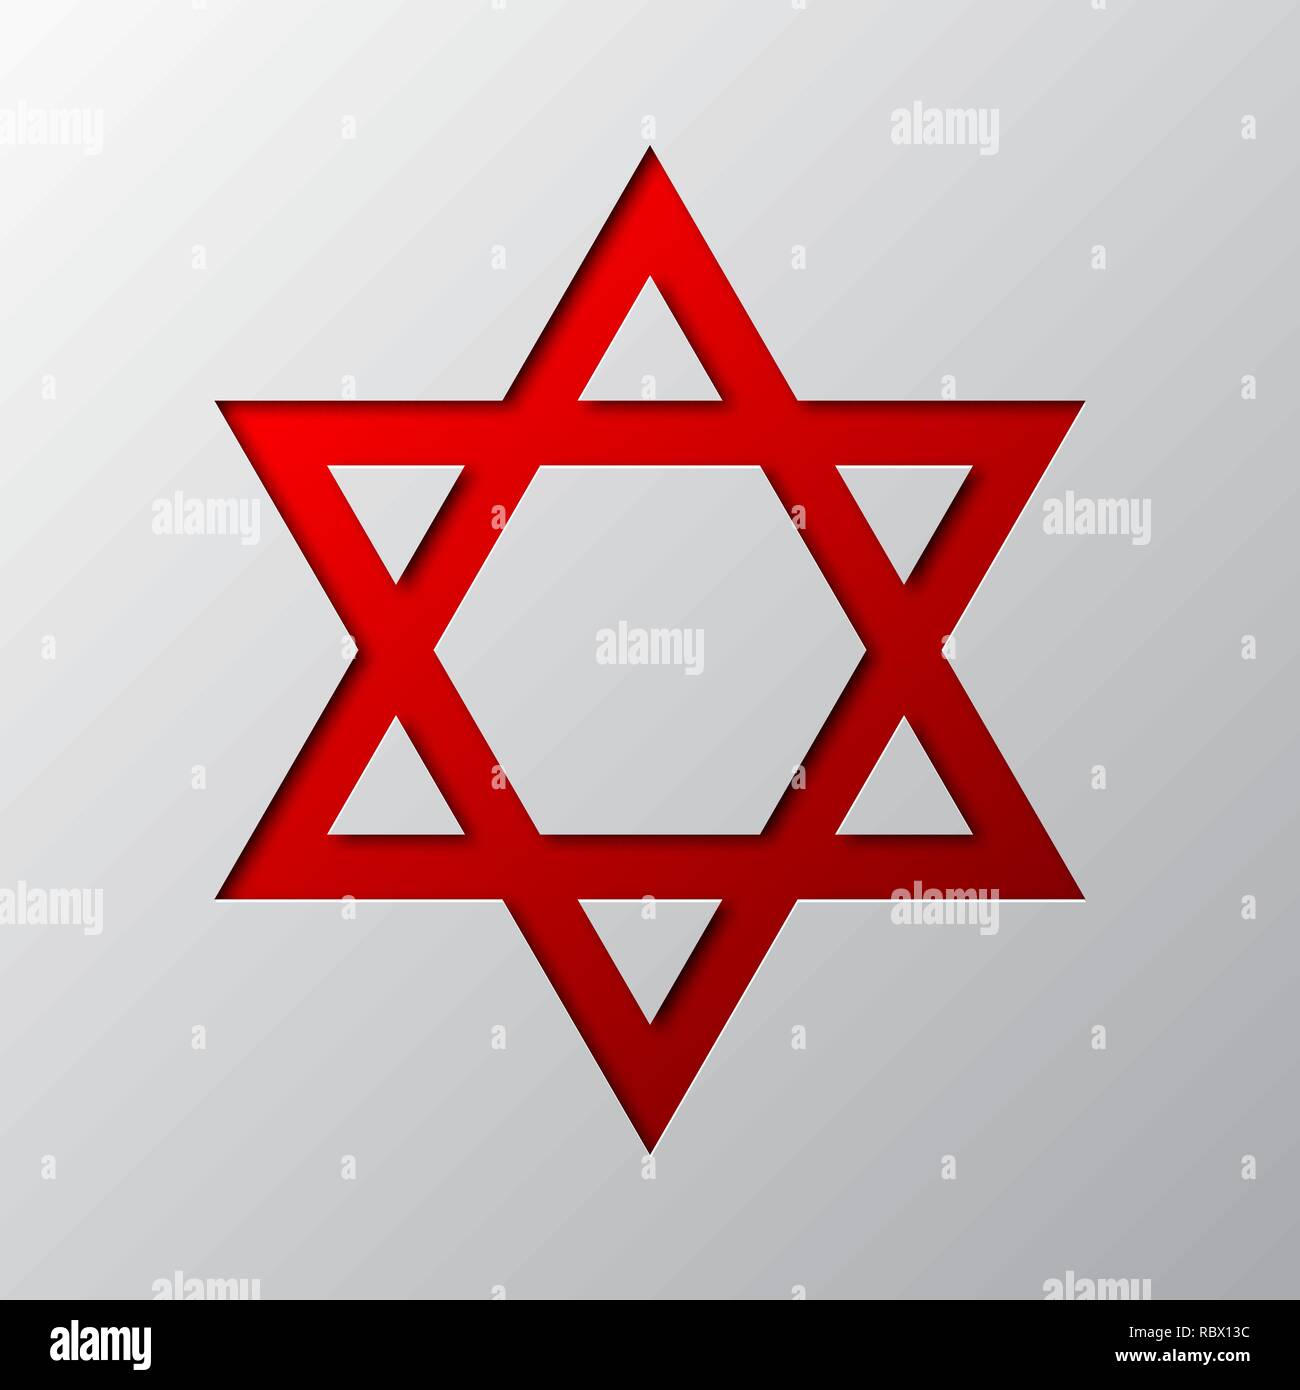 Paper art of red Star of David isolated. Vector illustration. Star of David icon is cut from paper. Stock Vector